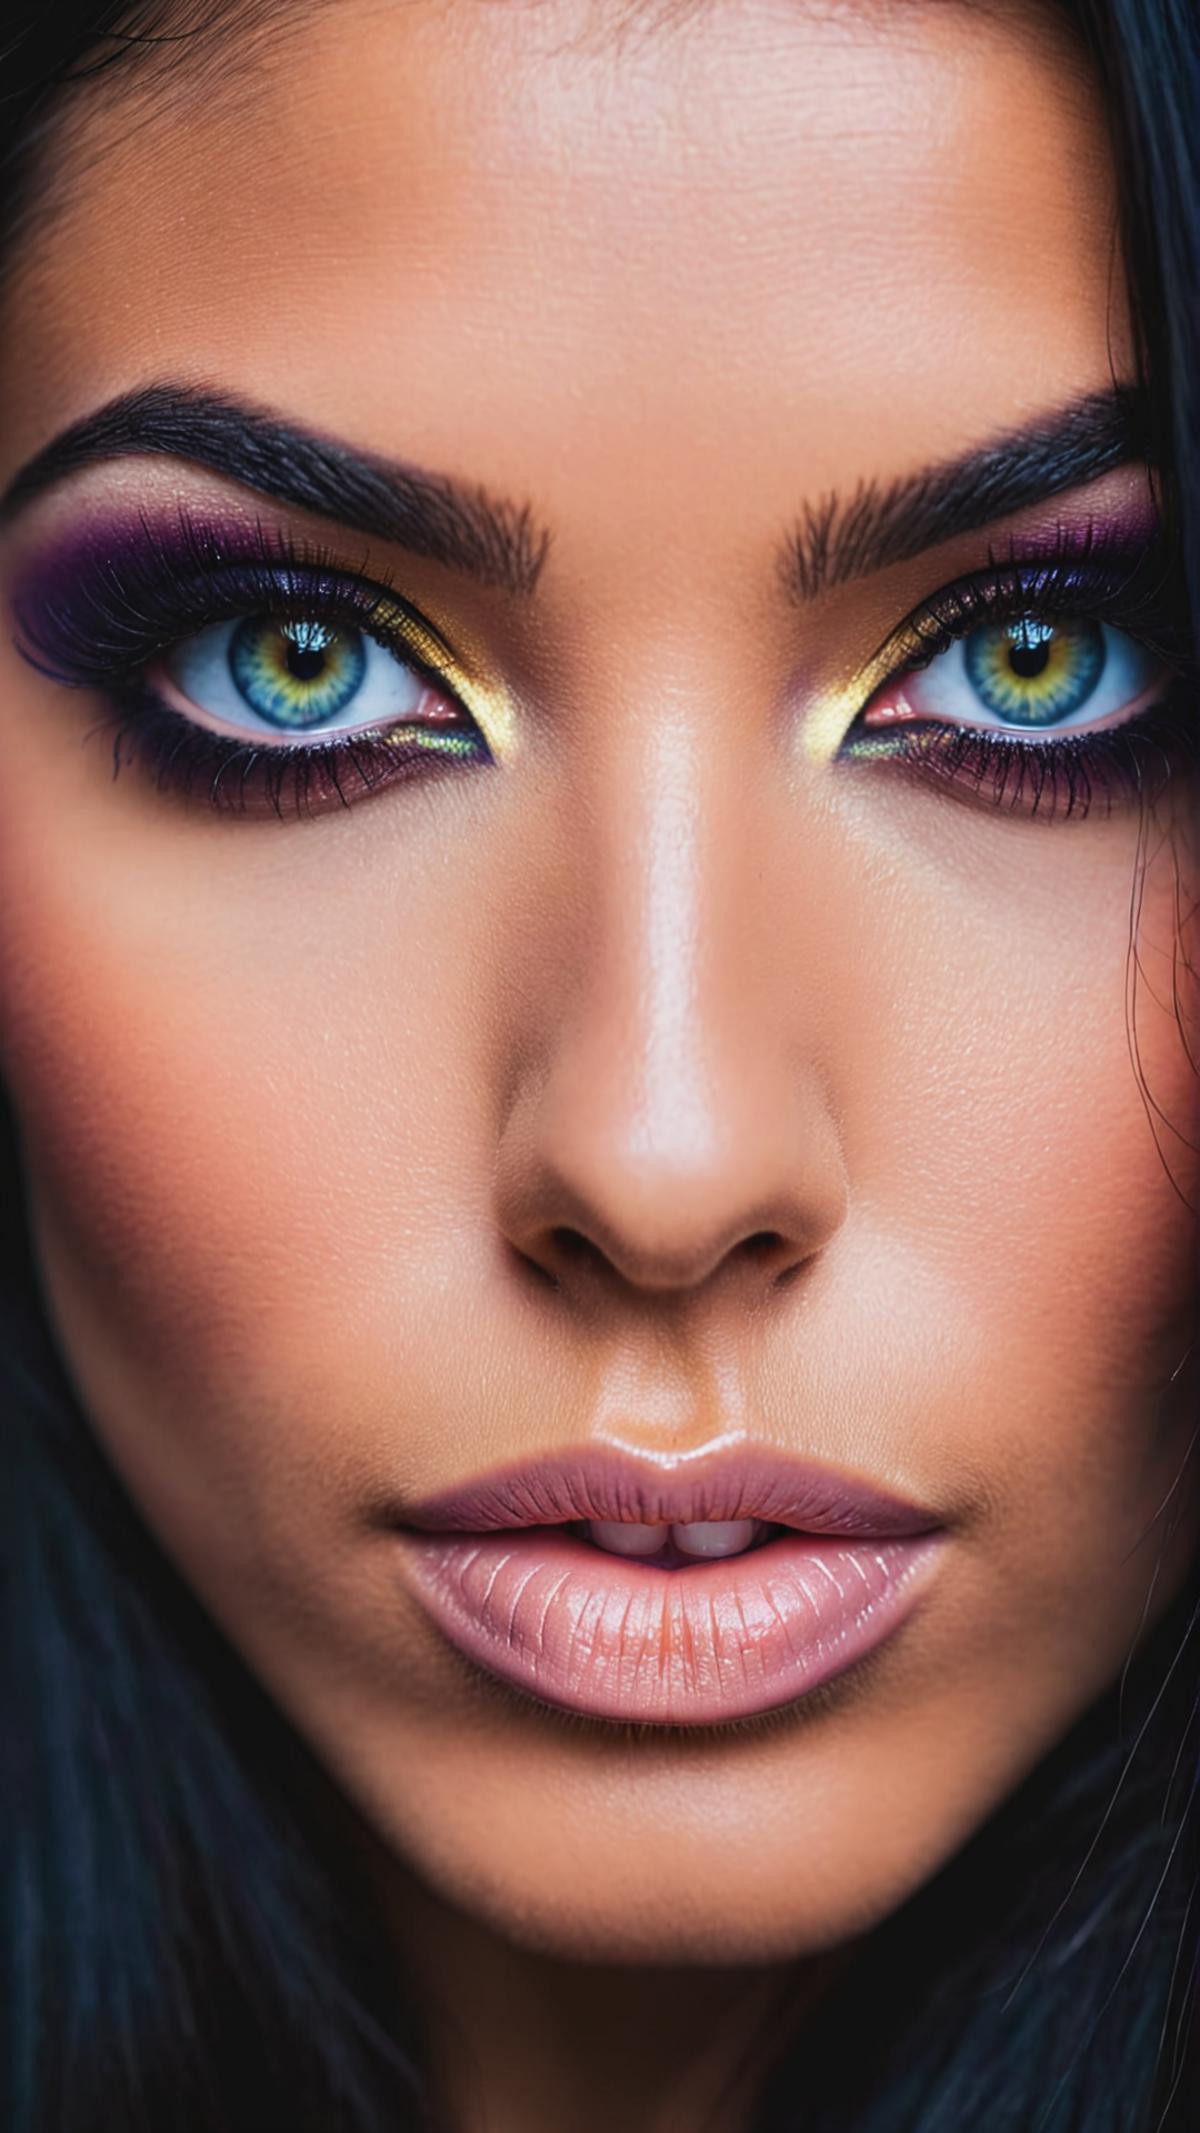 A close-up of a woman's face with yellow and blue eyeshadow and lipstick.